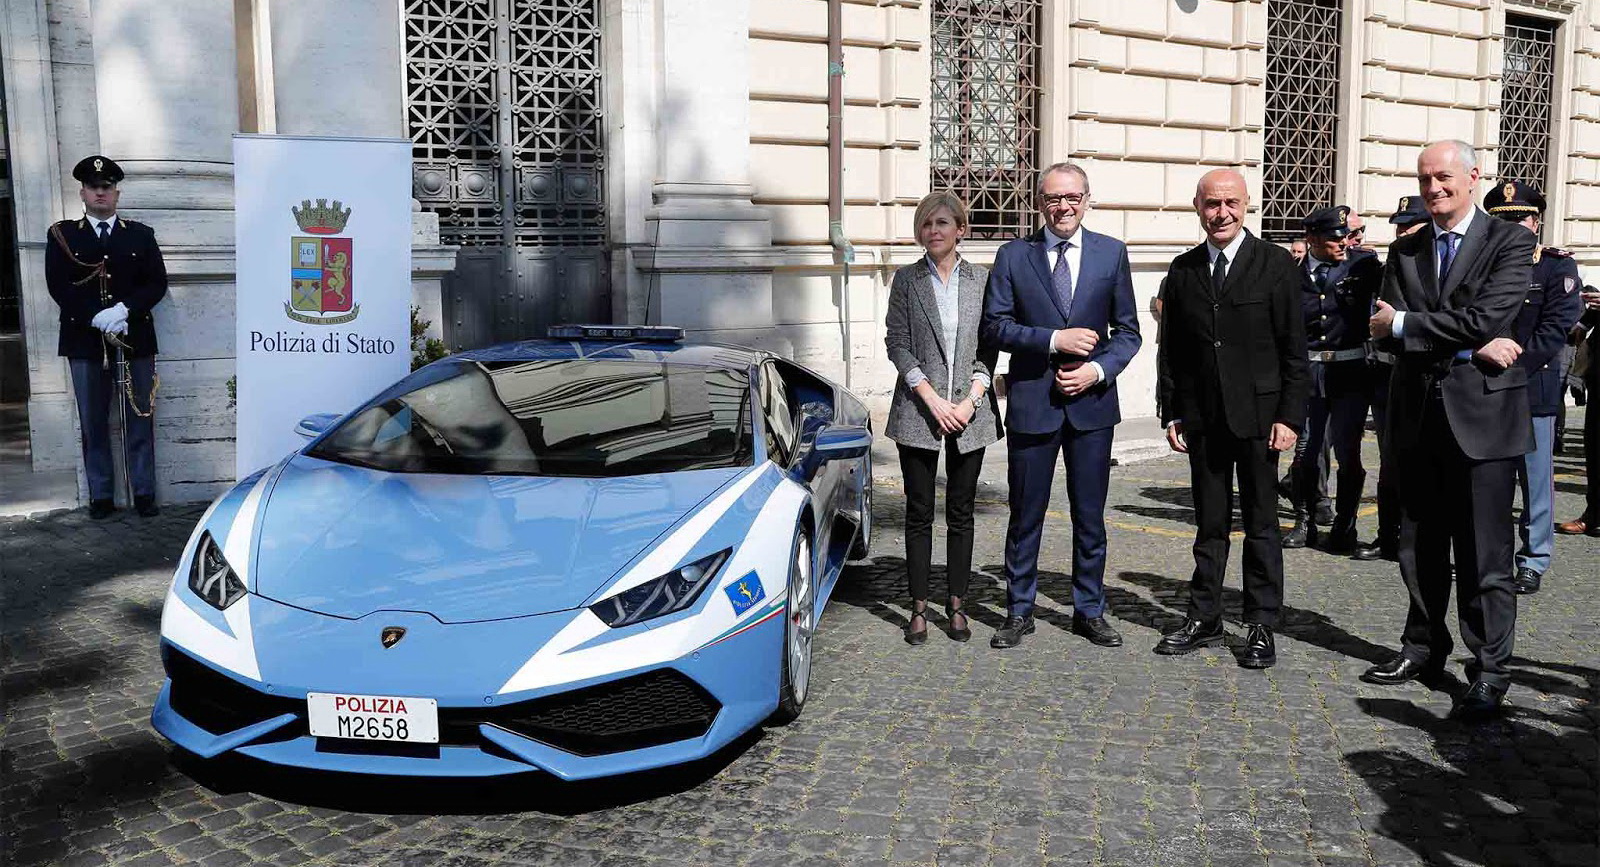 Italian Police Used A Lamborghini Huracan For Urgent 300-Mile Kidney  Transport Run From Rome To Padua | Carscoops